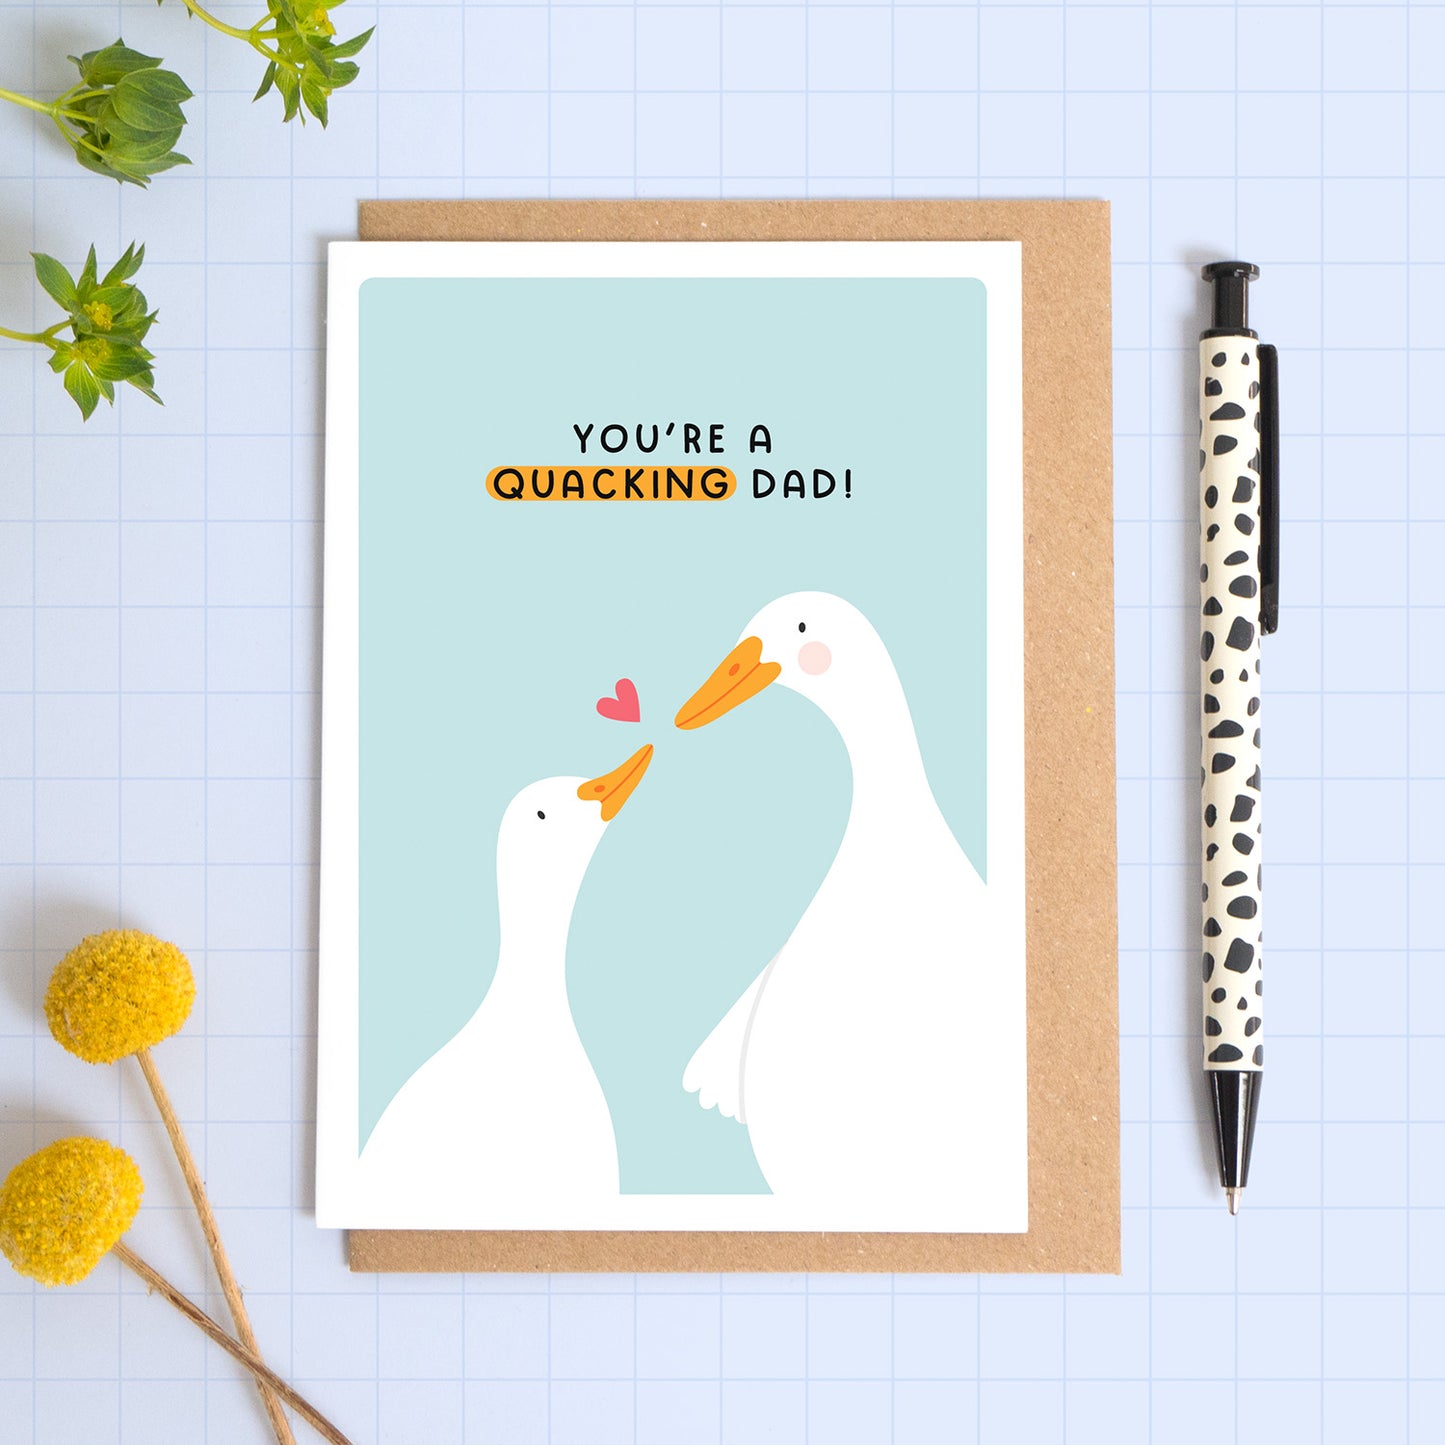 A blue card with a white border featuring two cute ducks and the phrase 'you're a quacking dad!’. The card is laid on a kraft brown envelope on top of a blue background next to a pen and flowers.